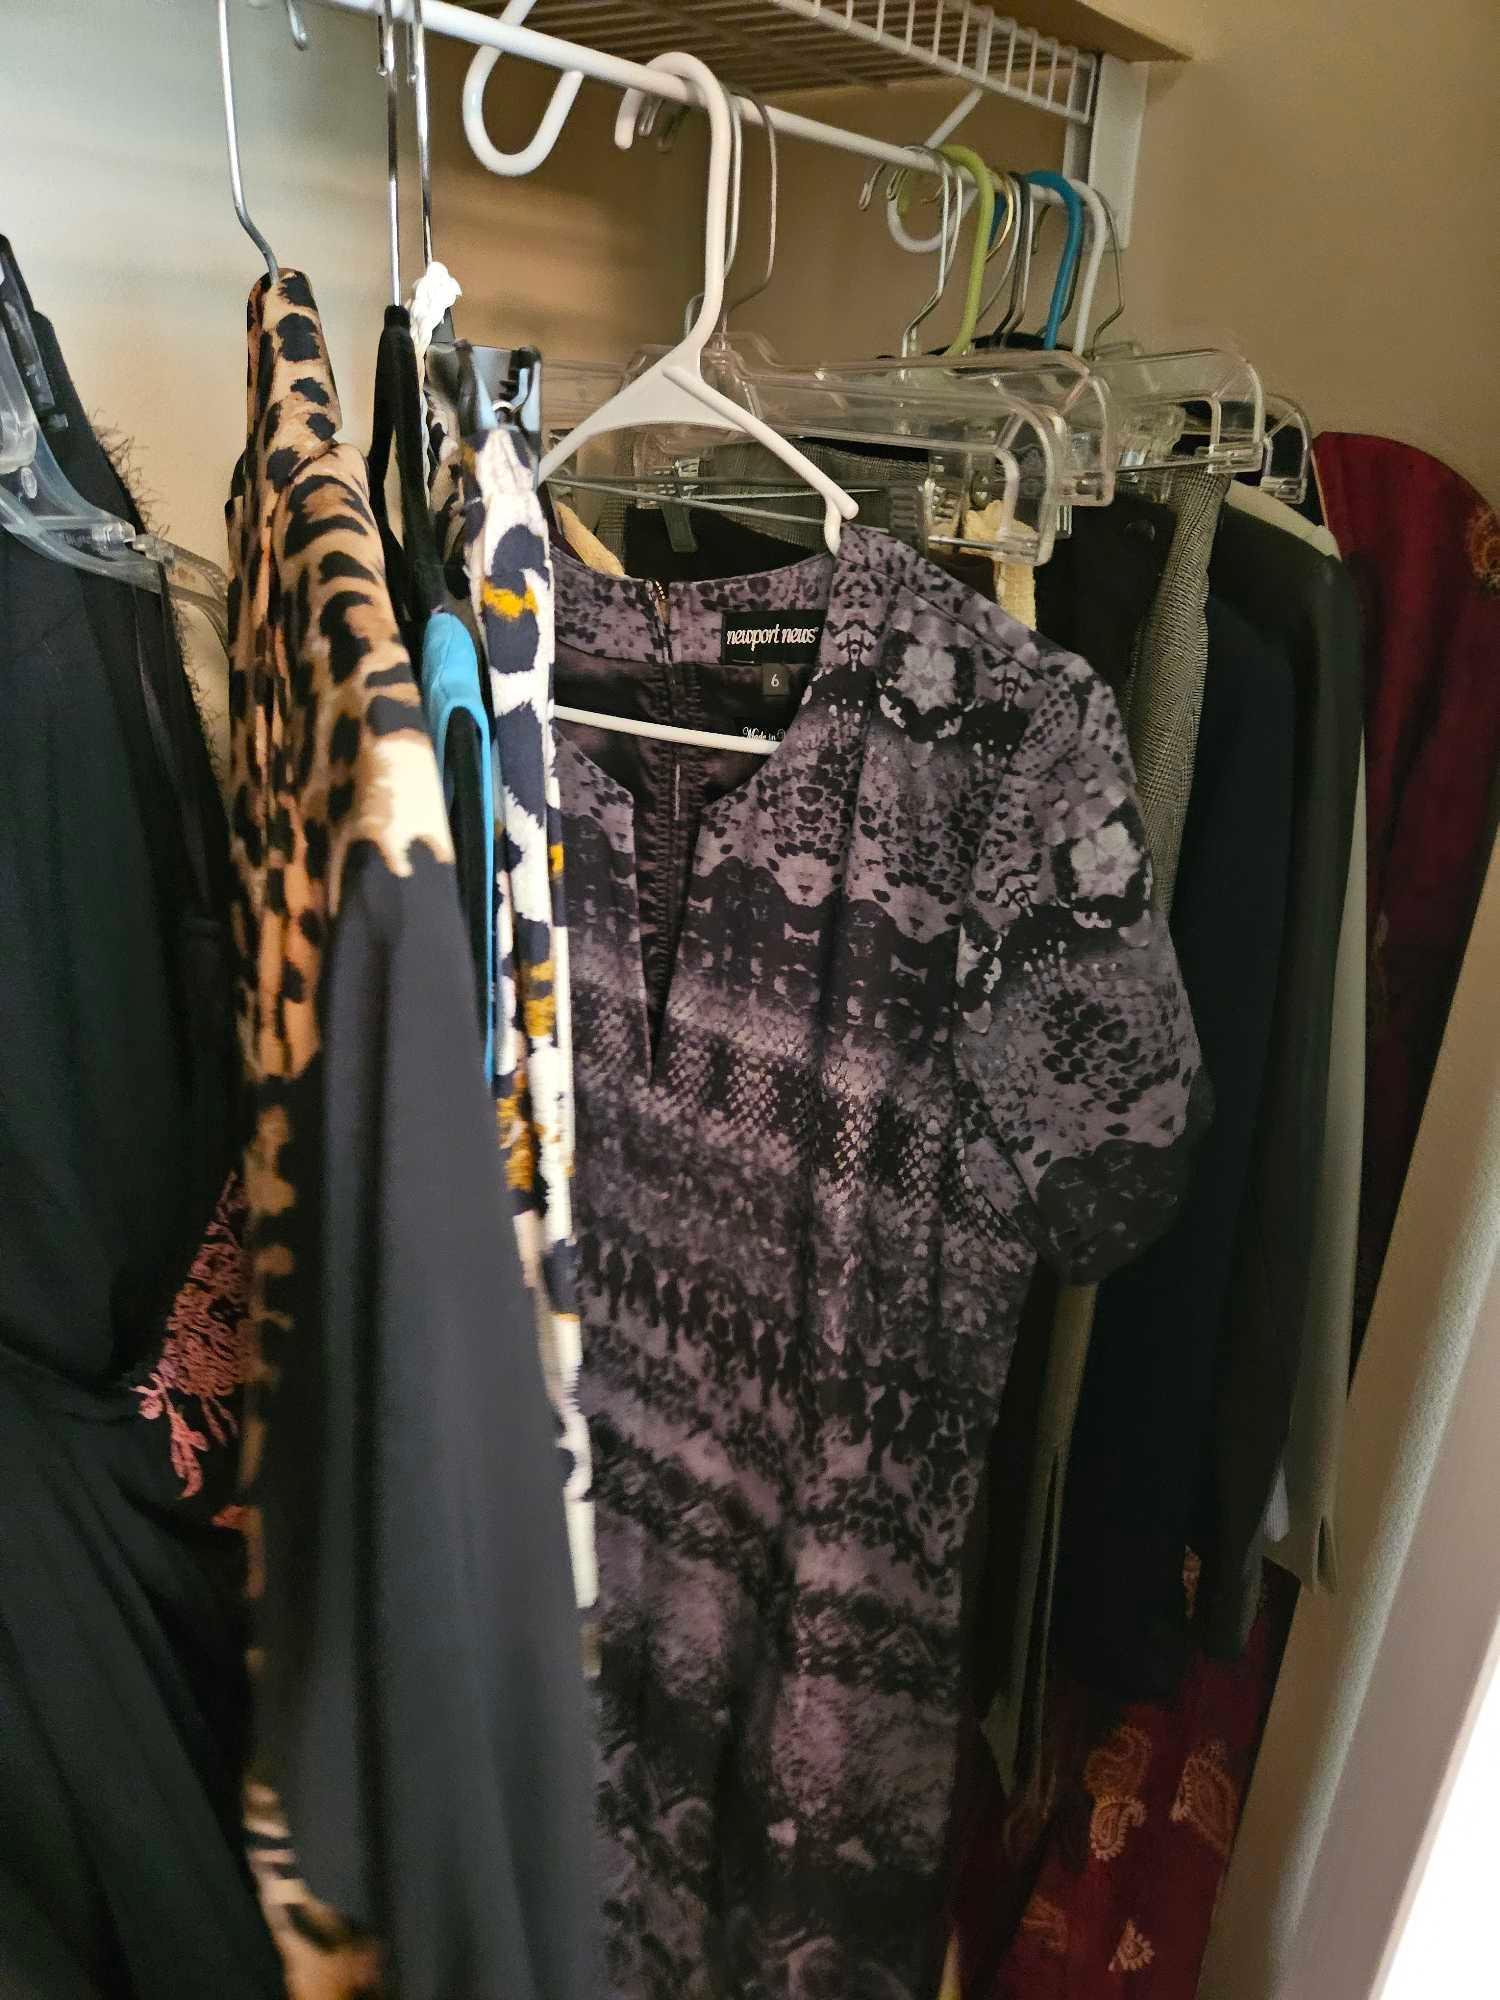 LADIES and MENS CLOTHING CONTENTS OF CLOSET